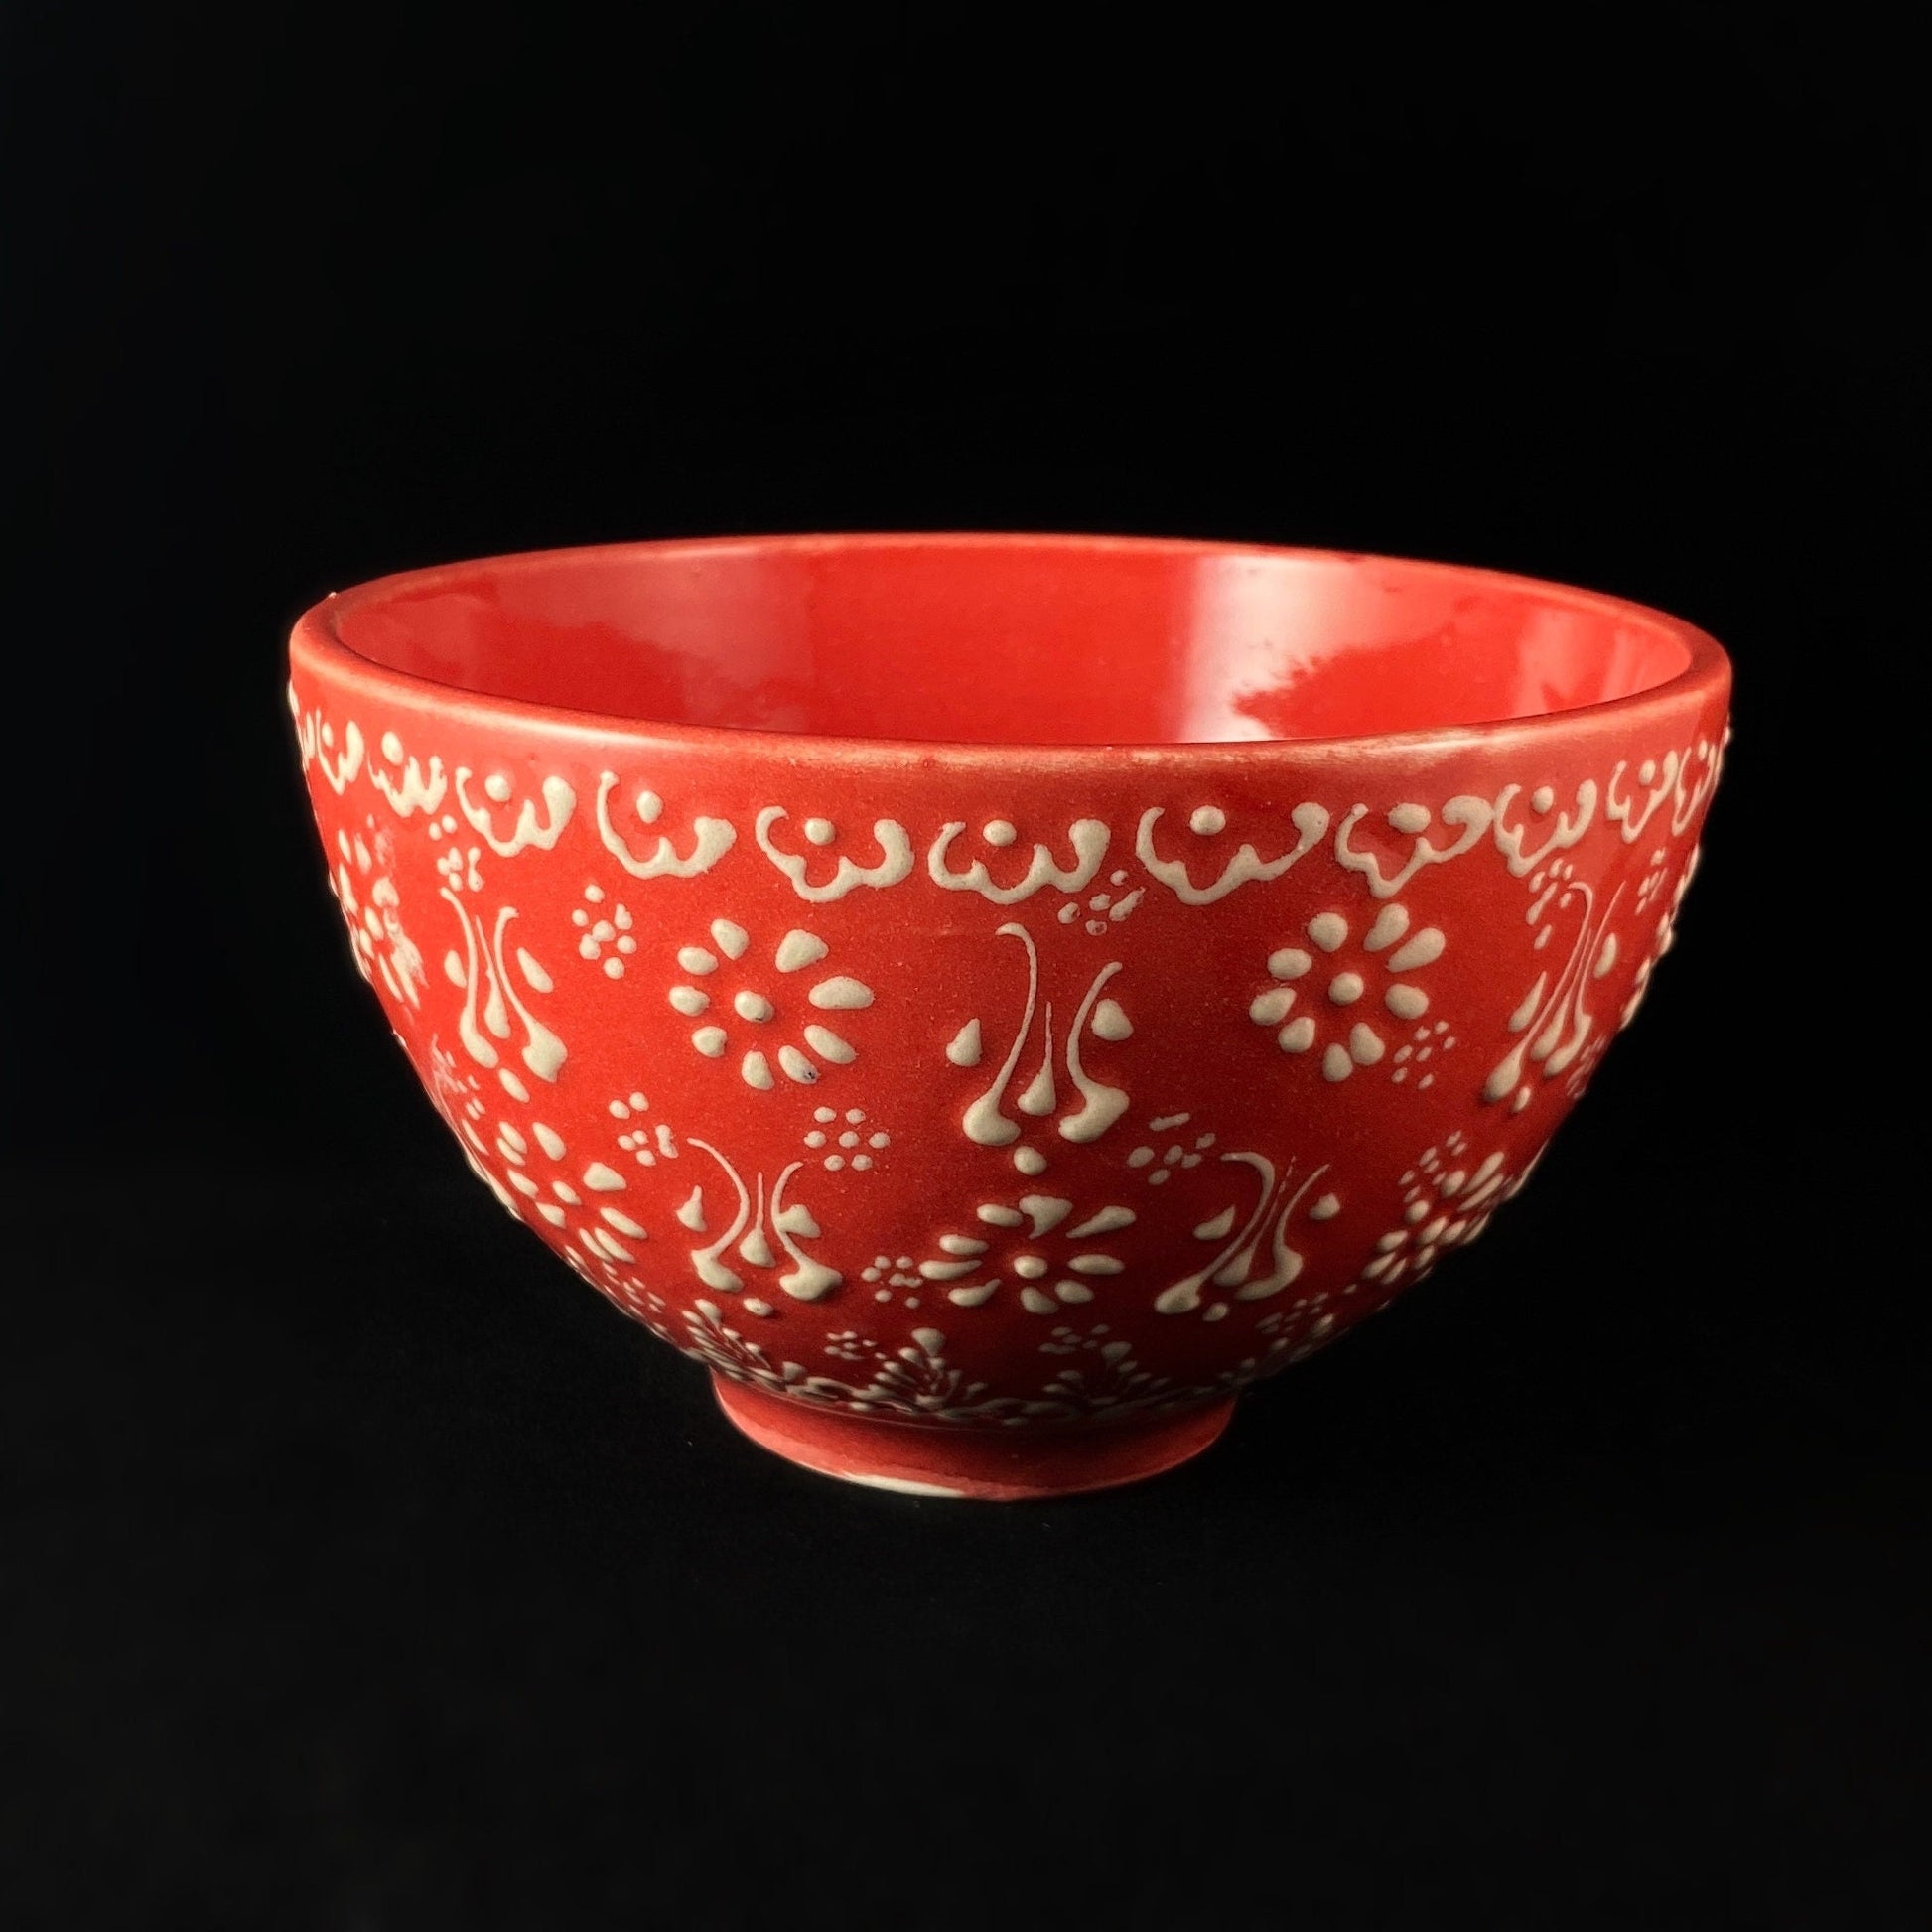 Handmade Footed Bowl, Functional and Decorative Turkish Pottery, Cottagecore Style, Red